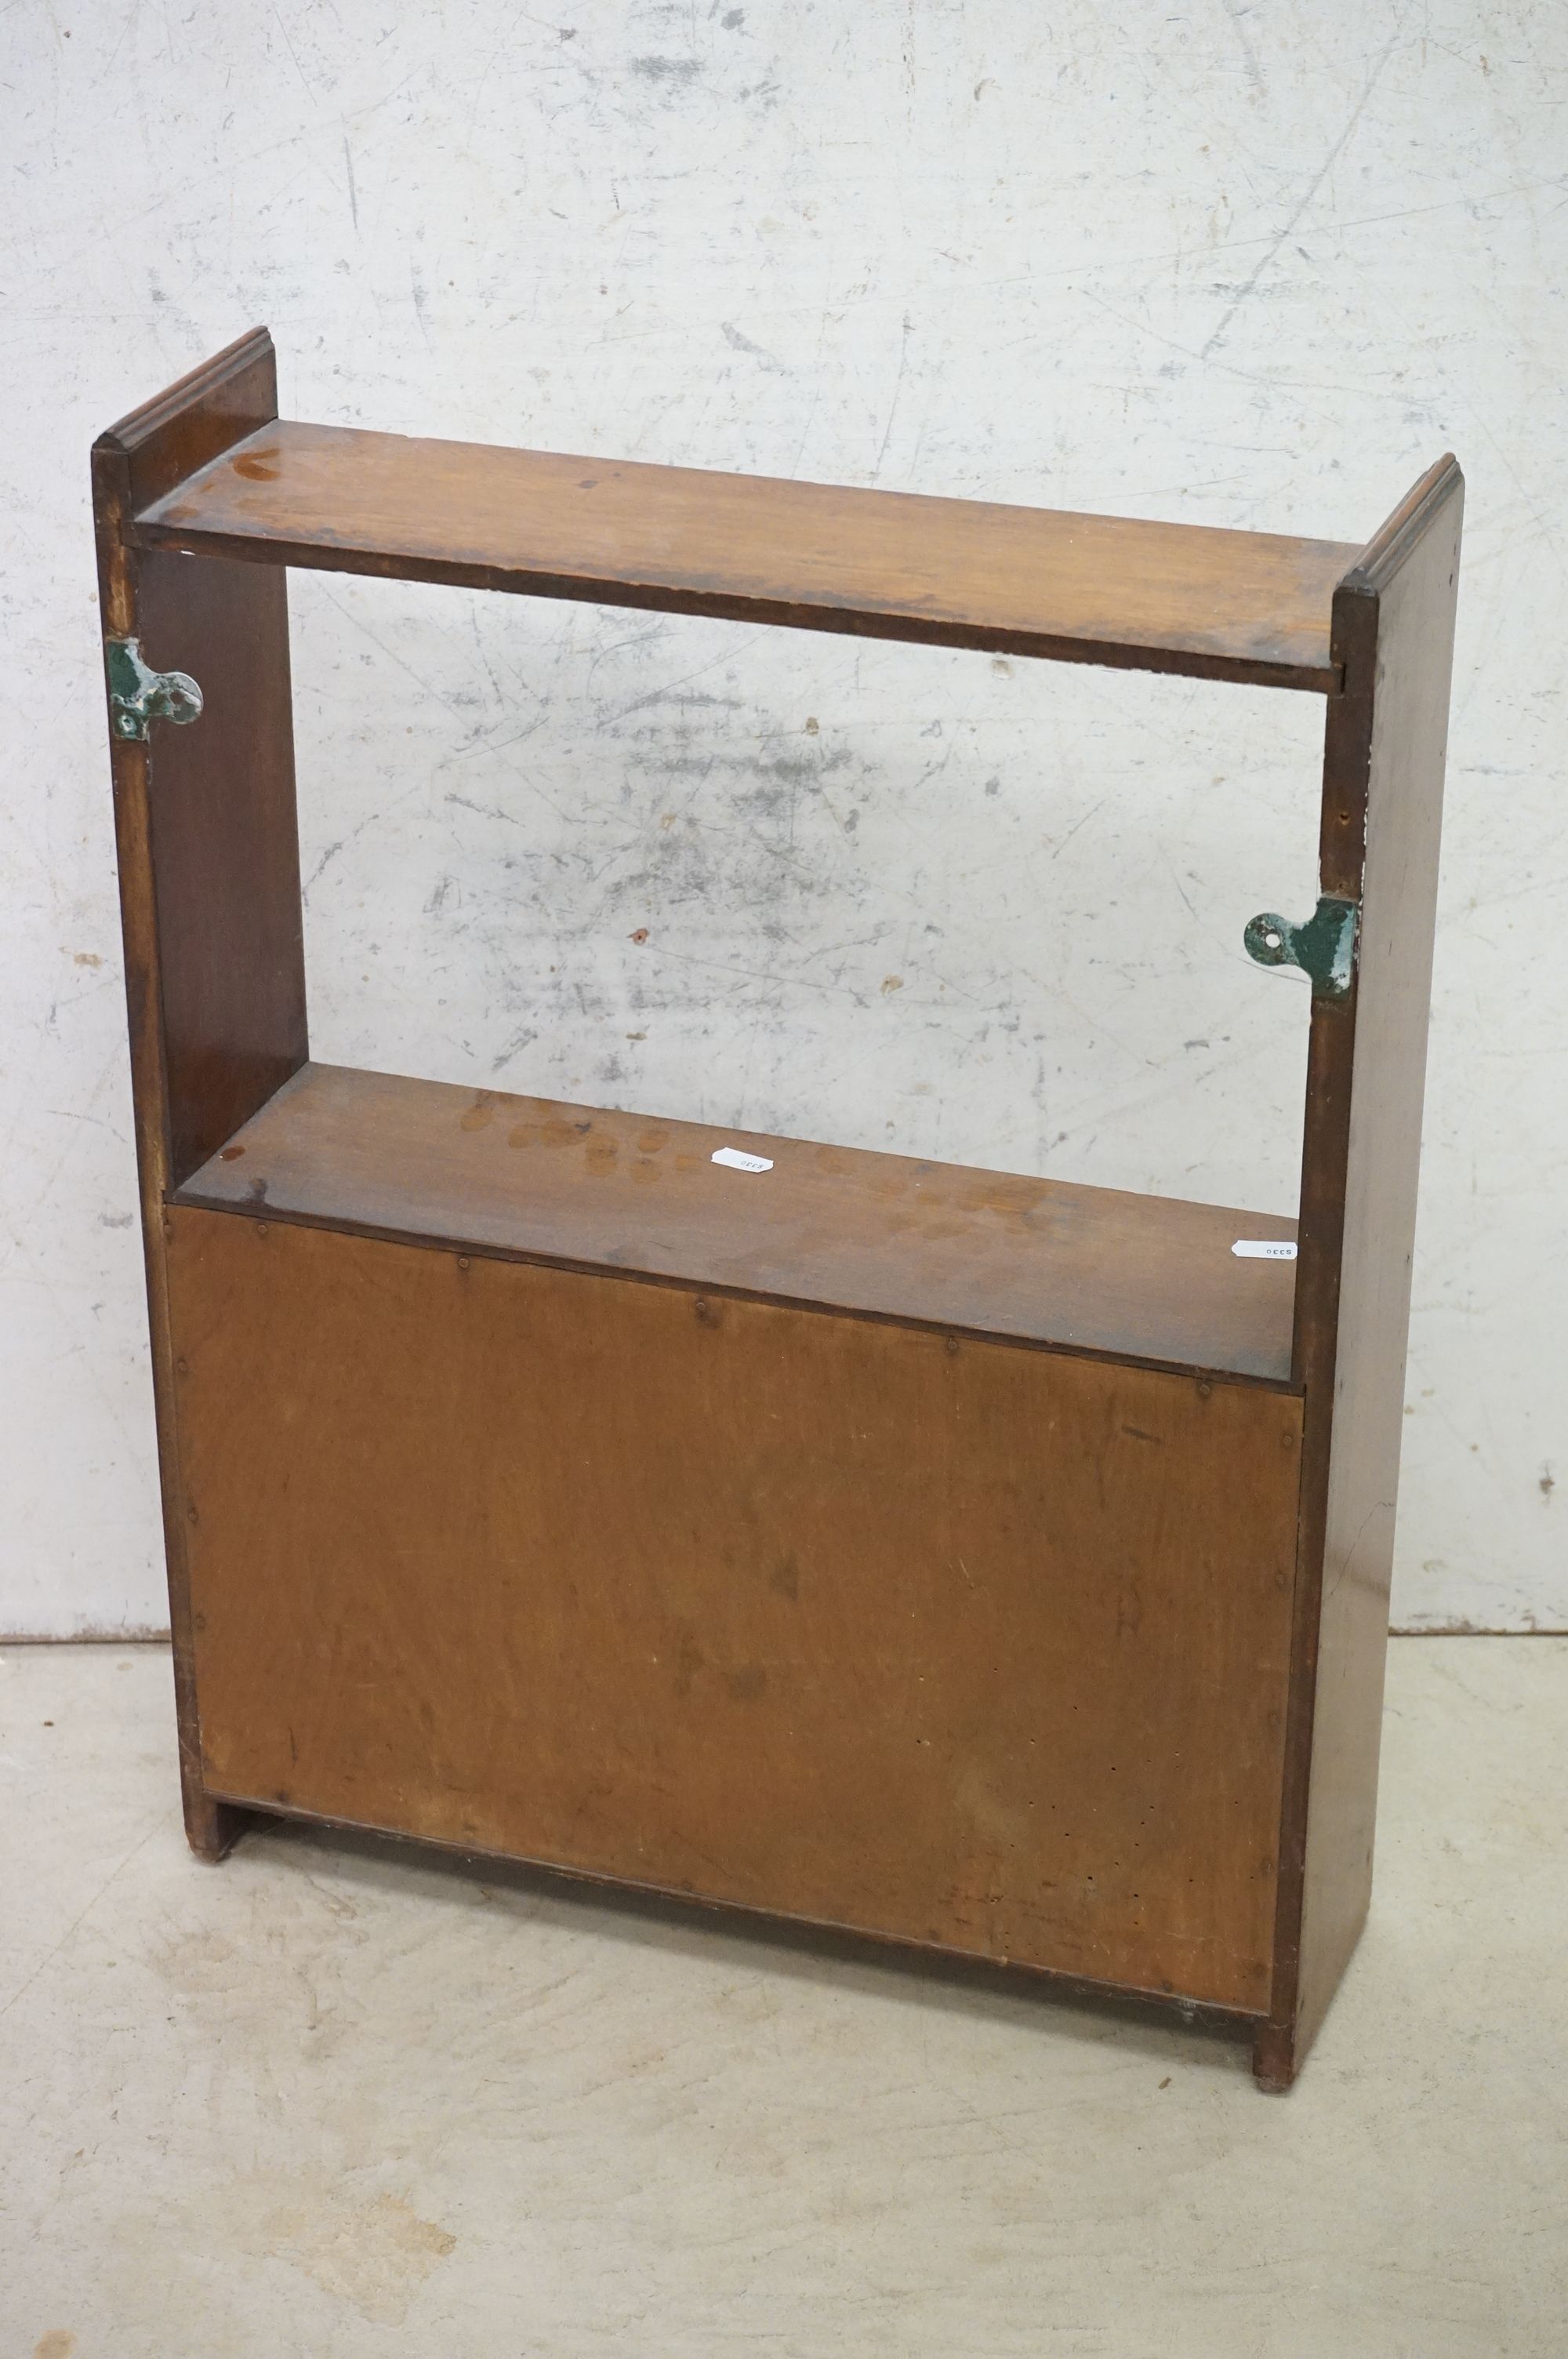 19th / Early 20th century Mahogany Hanging Wall Shelf and Cupboard, 48cm wide x 63cm high - Image 6 of 6